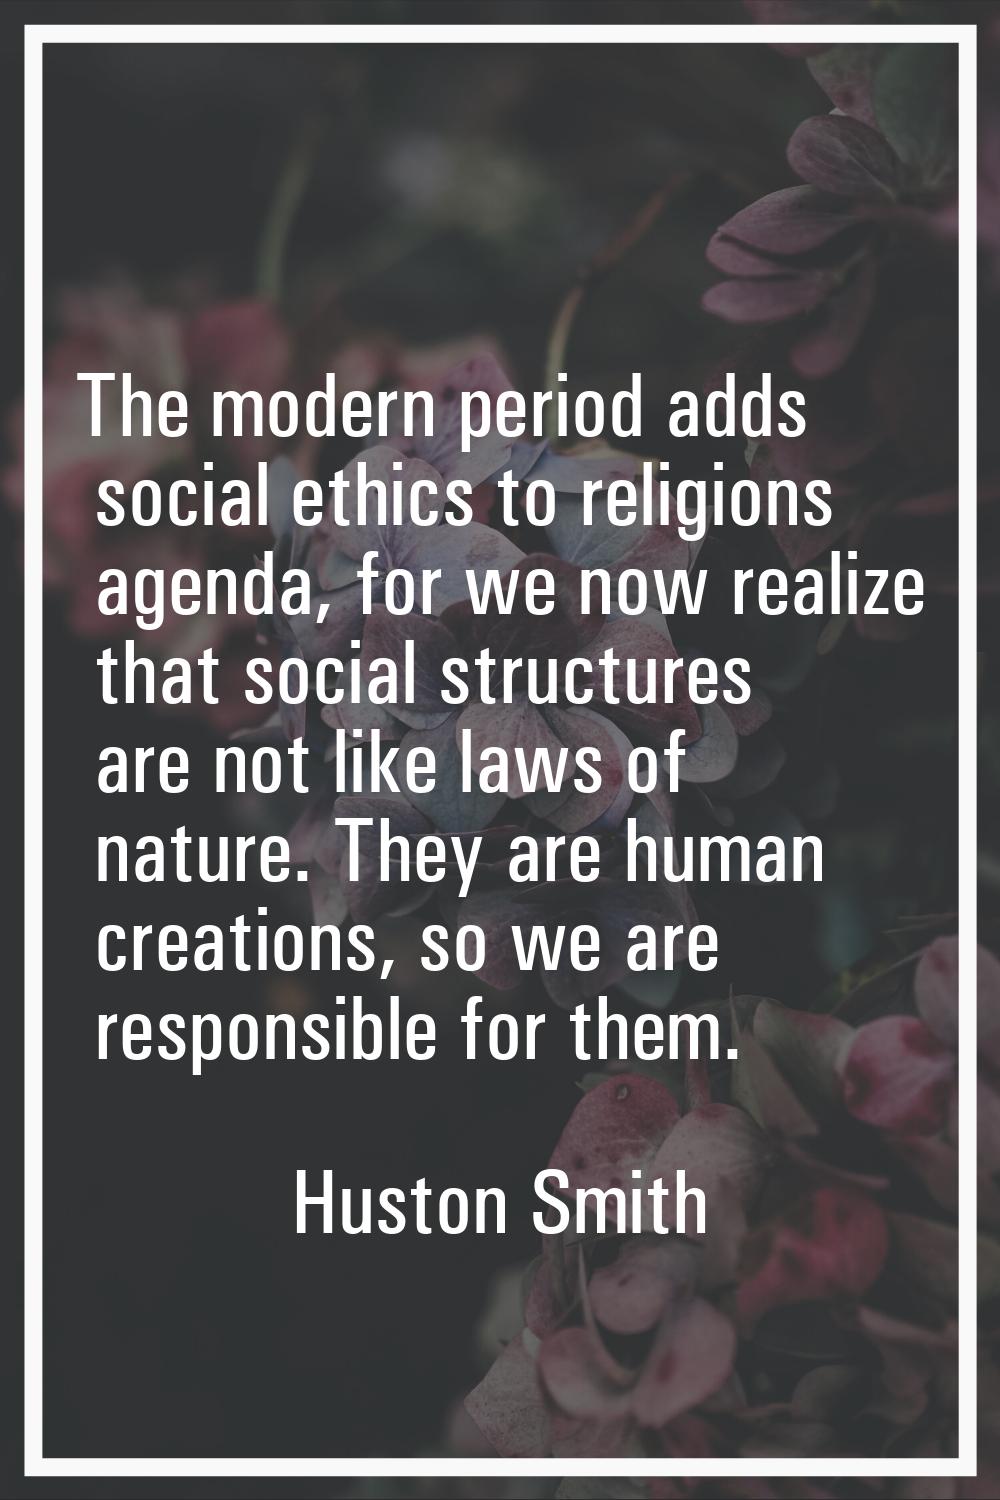 The modern period adds social ethics to religions agenda, for we now realize that social structures